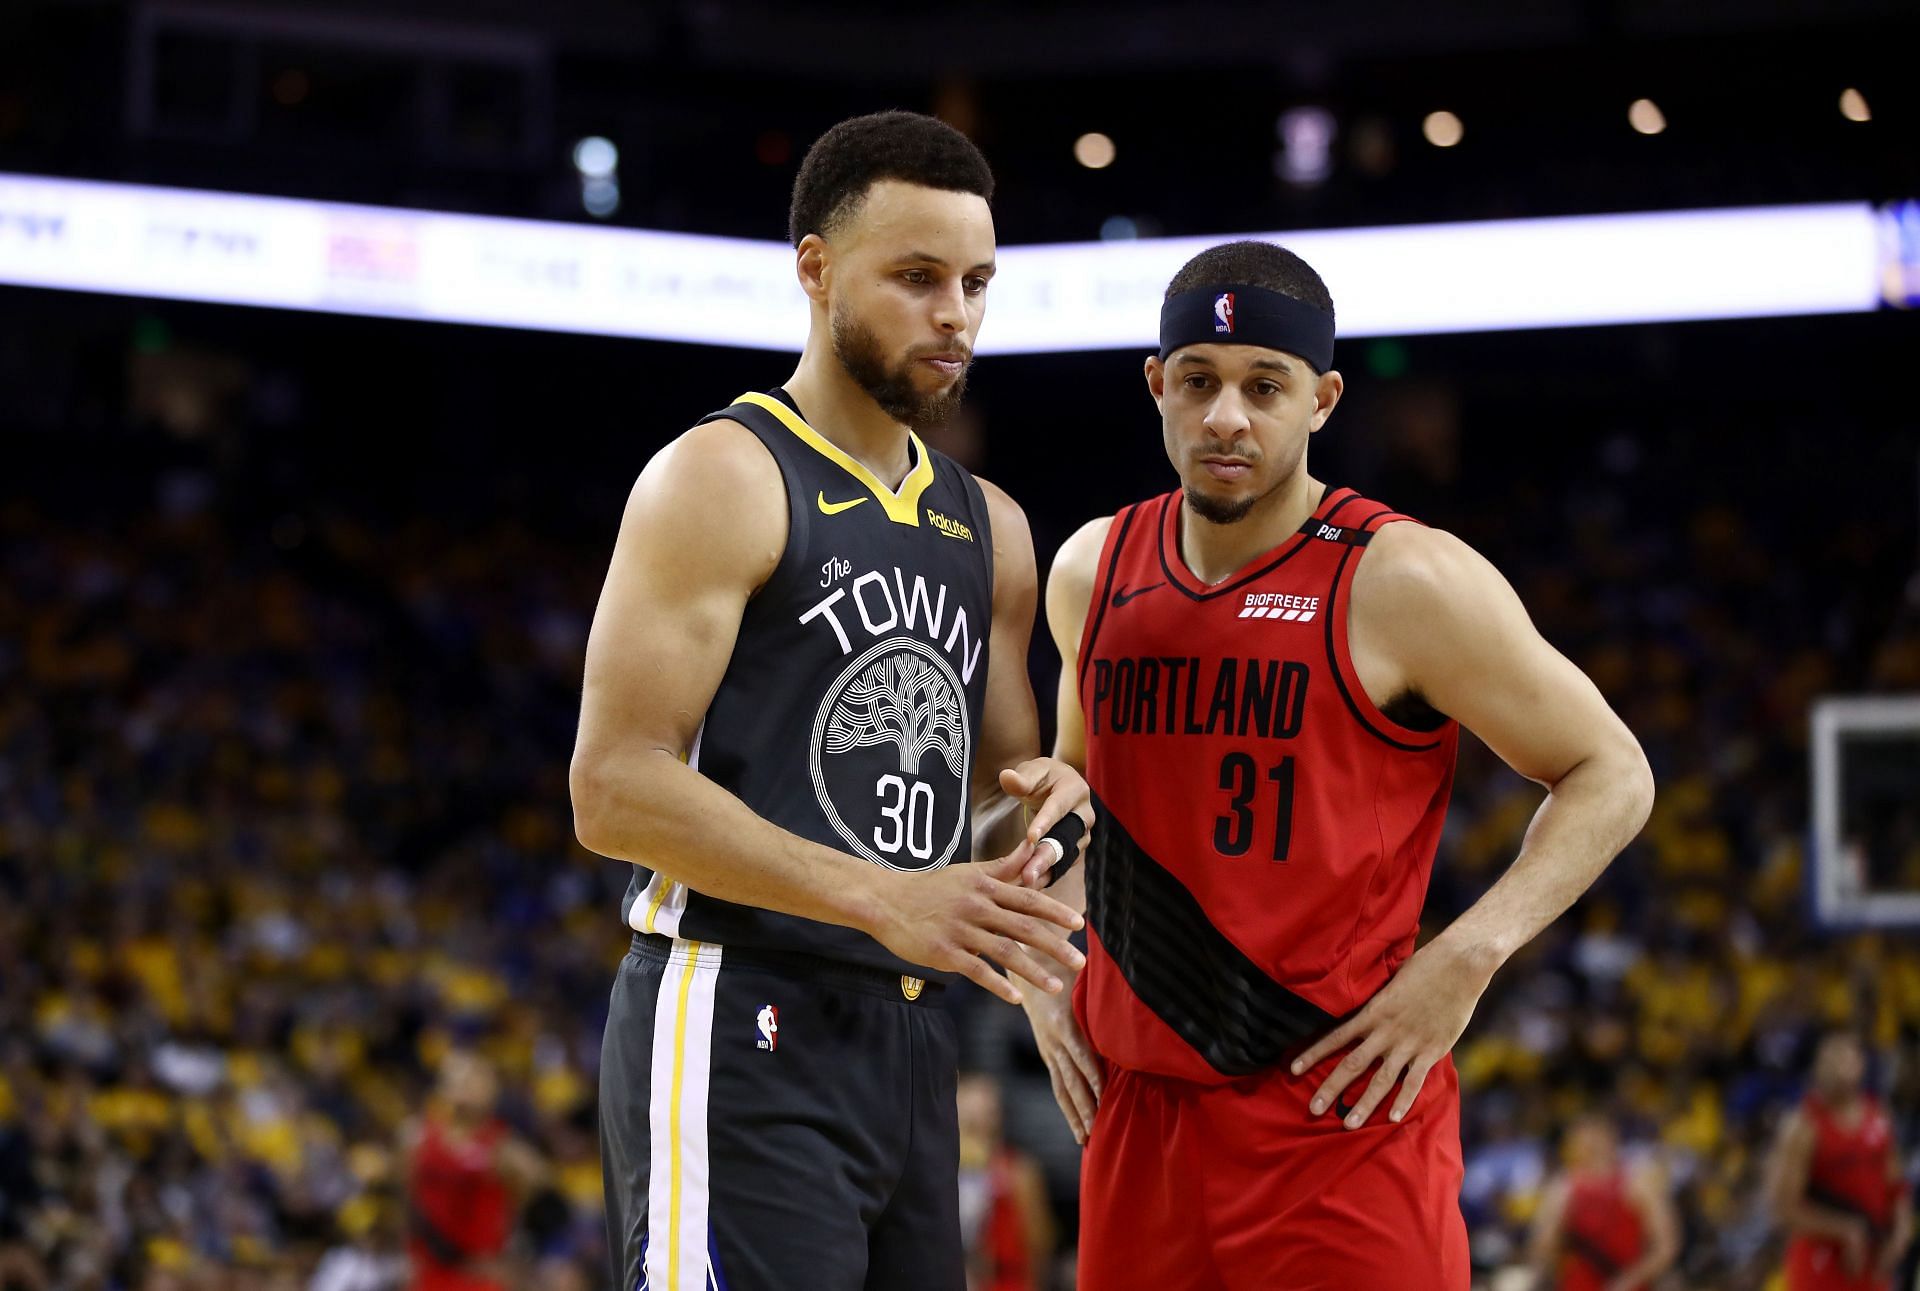 Seth Curry and Steph Curry (left) during the 2019 NBA Western Conference Finals